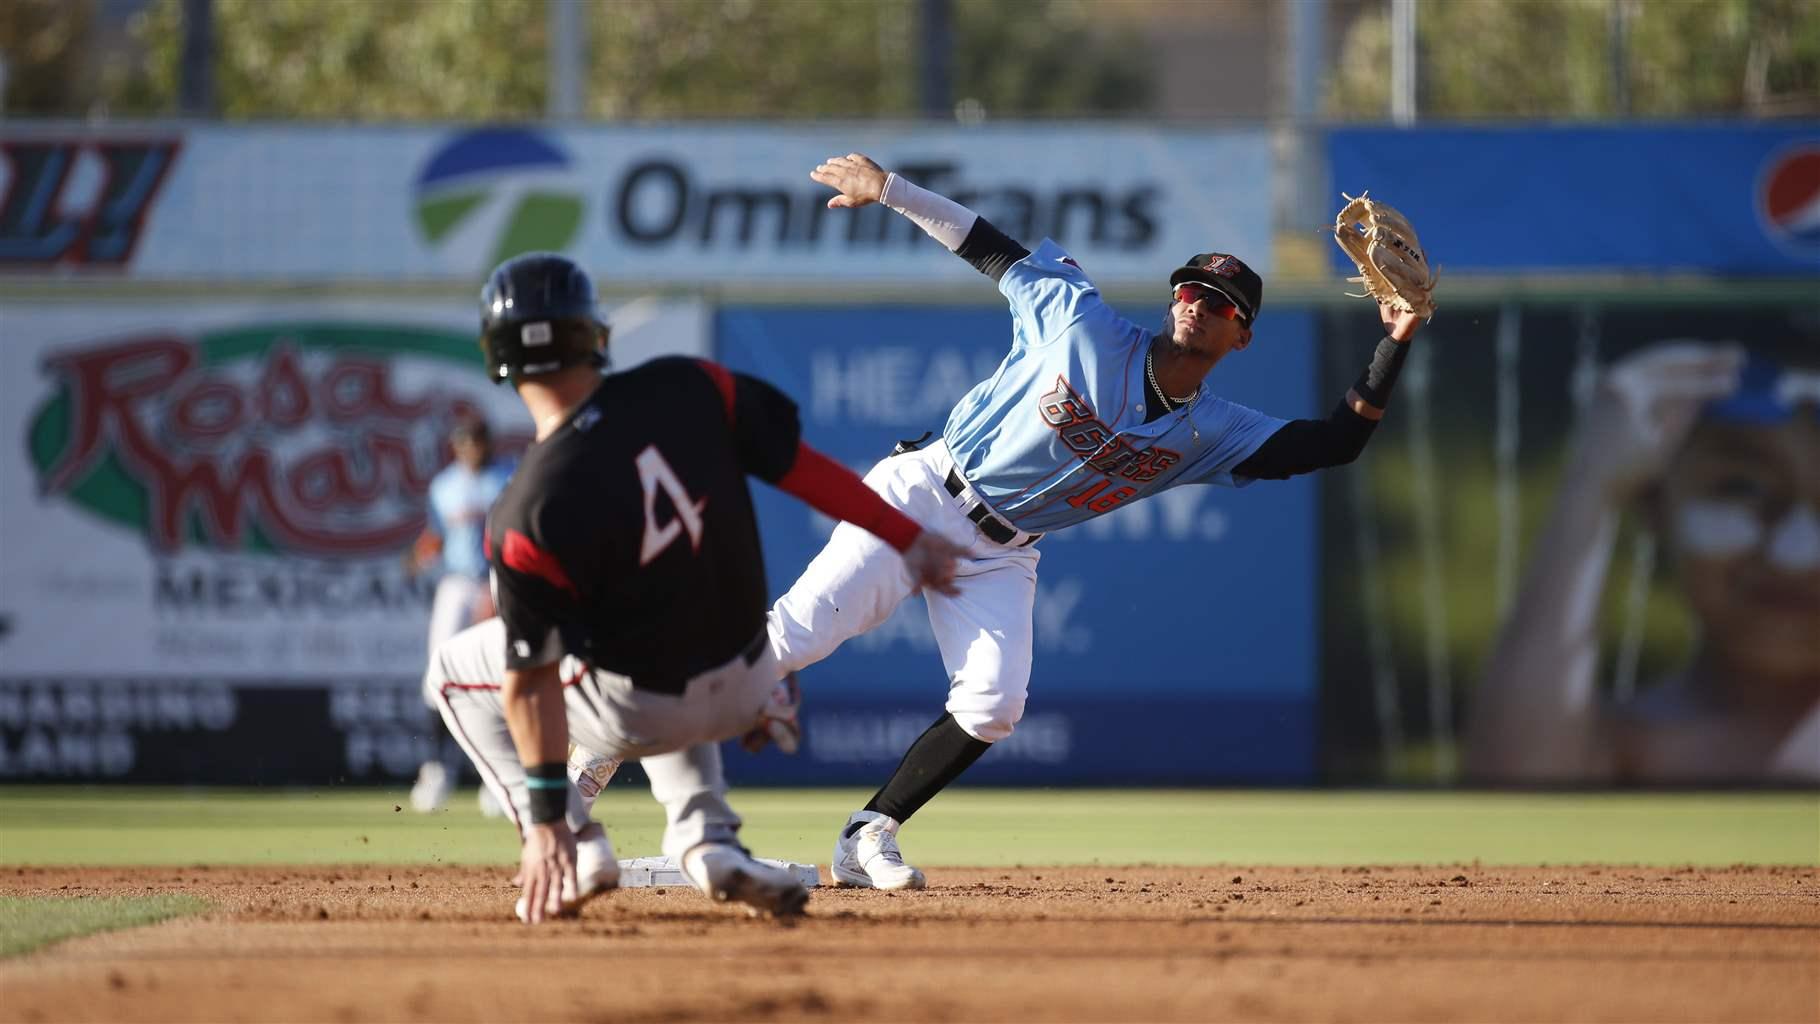 Adrian Placencia (16) of the Inland Empire 66ers reaches for a wide throw against the Lake Elsinore Storm at San Manuel Stadium on August 28, 2022 in San Bernardino, California.